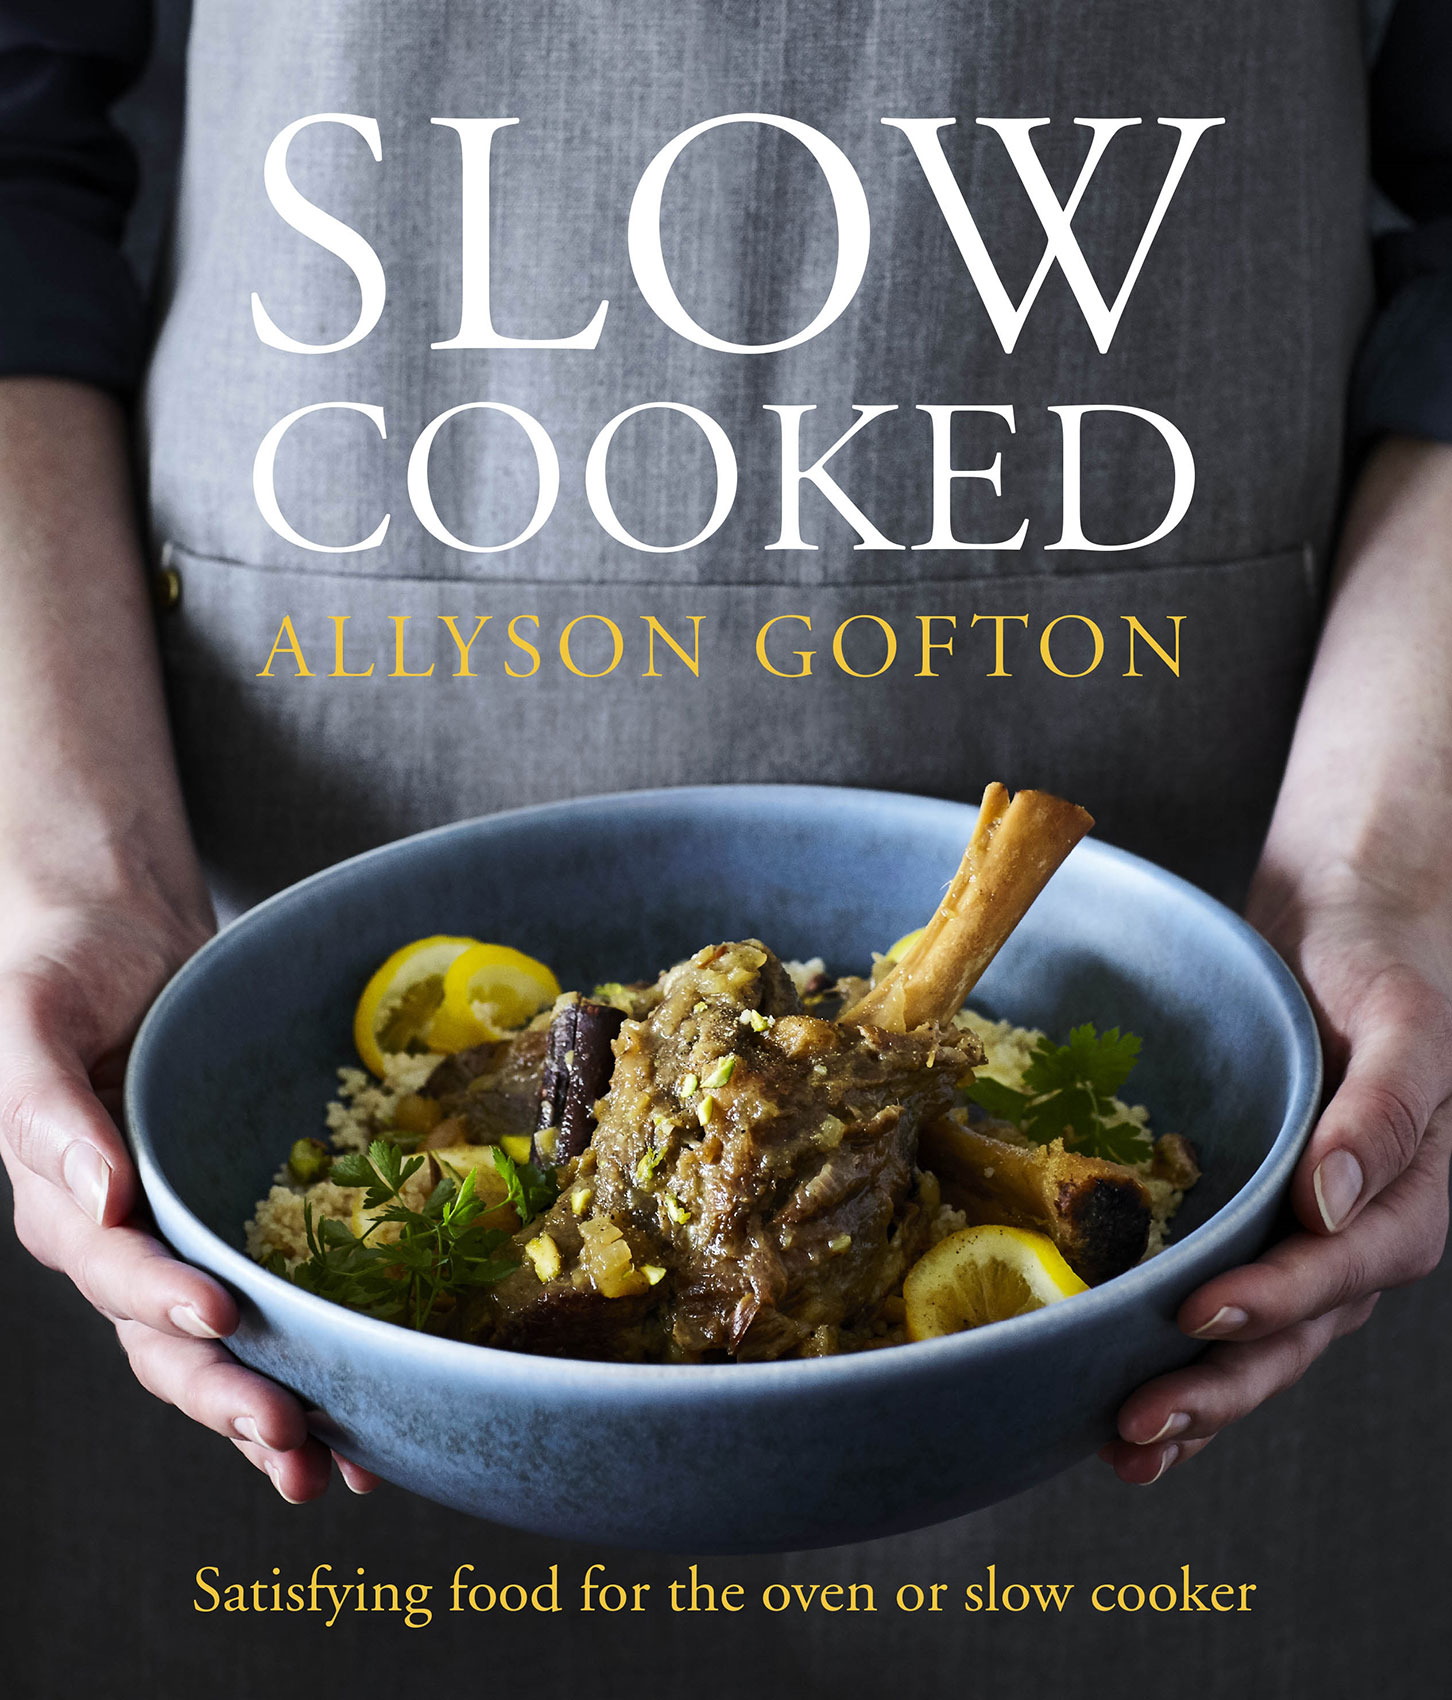 Slow Cooked • Satisfying Food for the Oven or Slow Cooker by Allyson Gofton • Cookbook & Editorial Food Photography